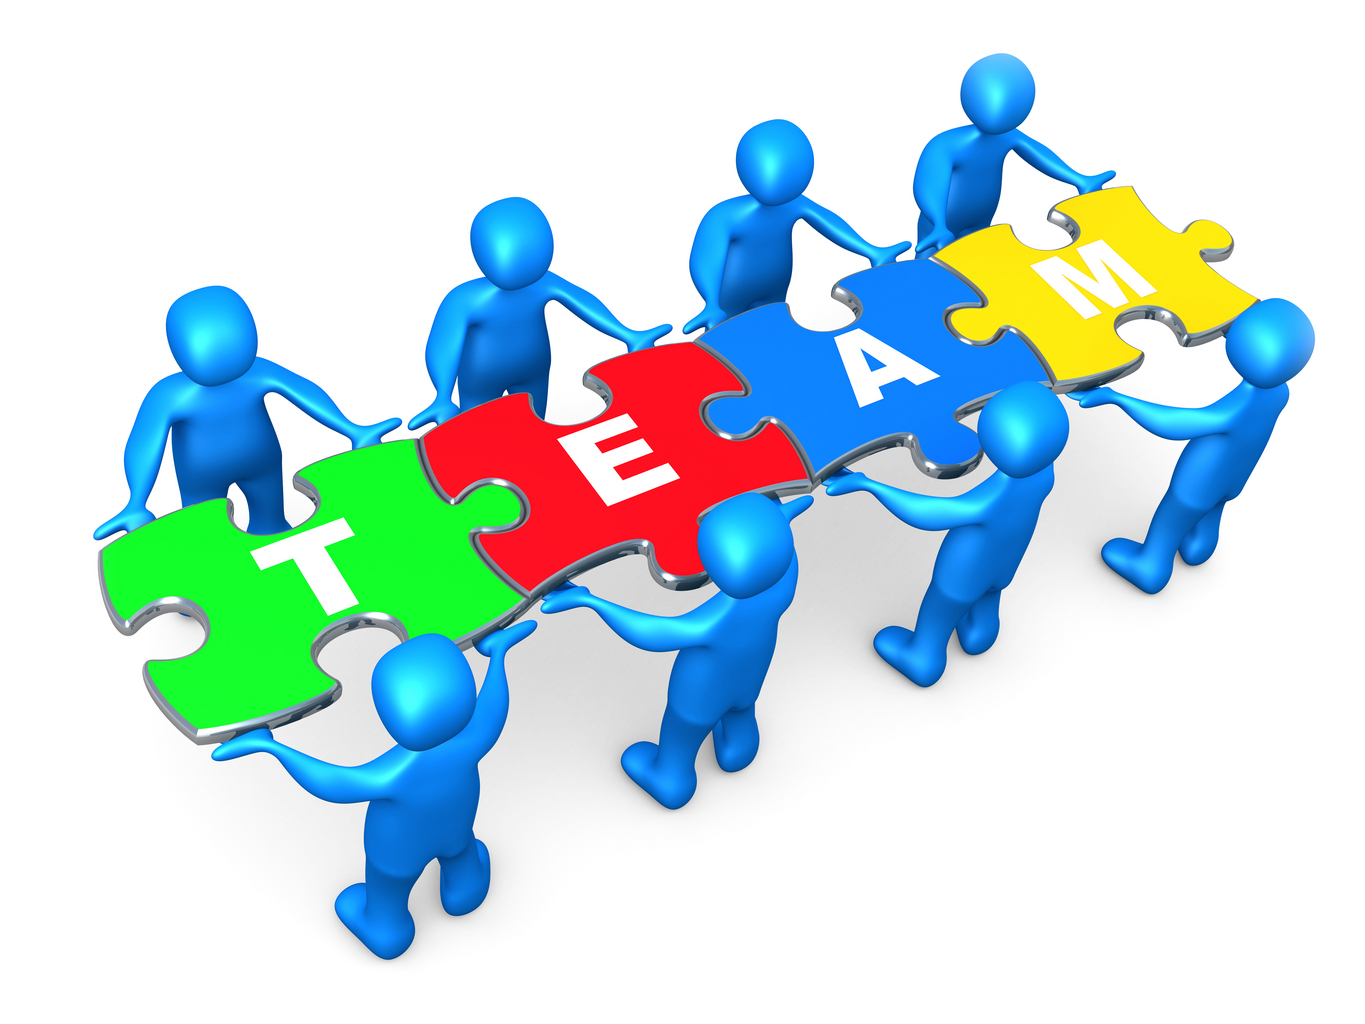 Teamwork Images Free - ClipArt Best